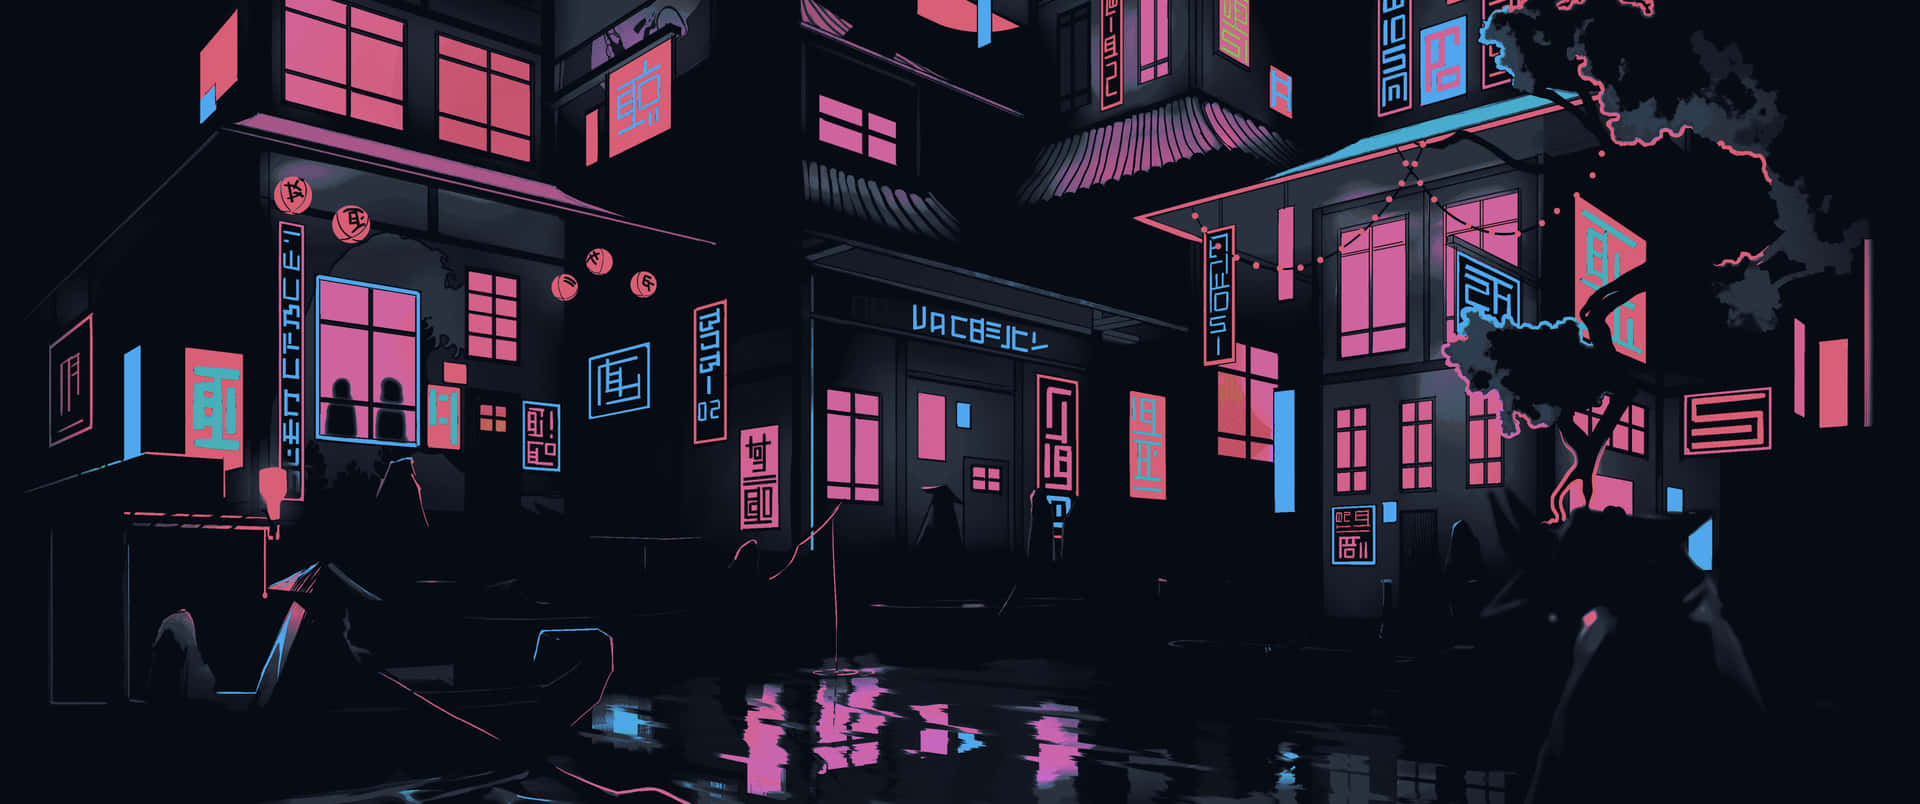 A View of a Neon-Colored City Wallpaper